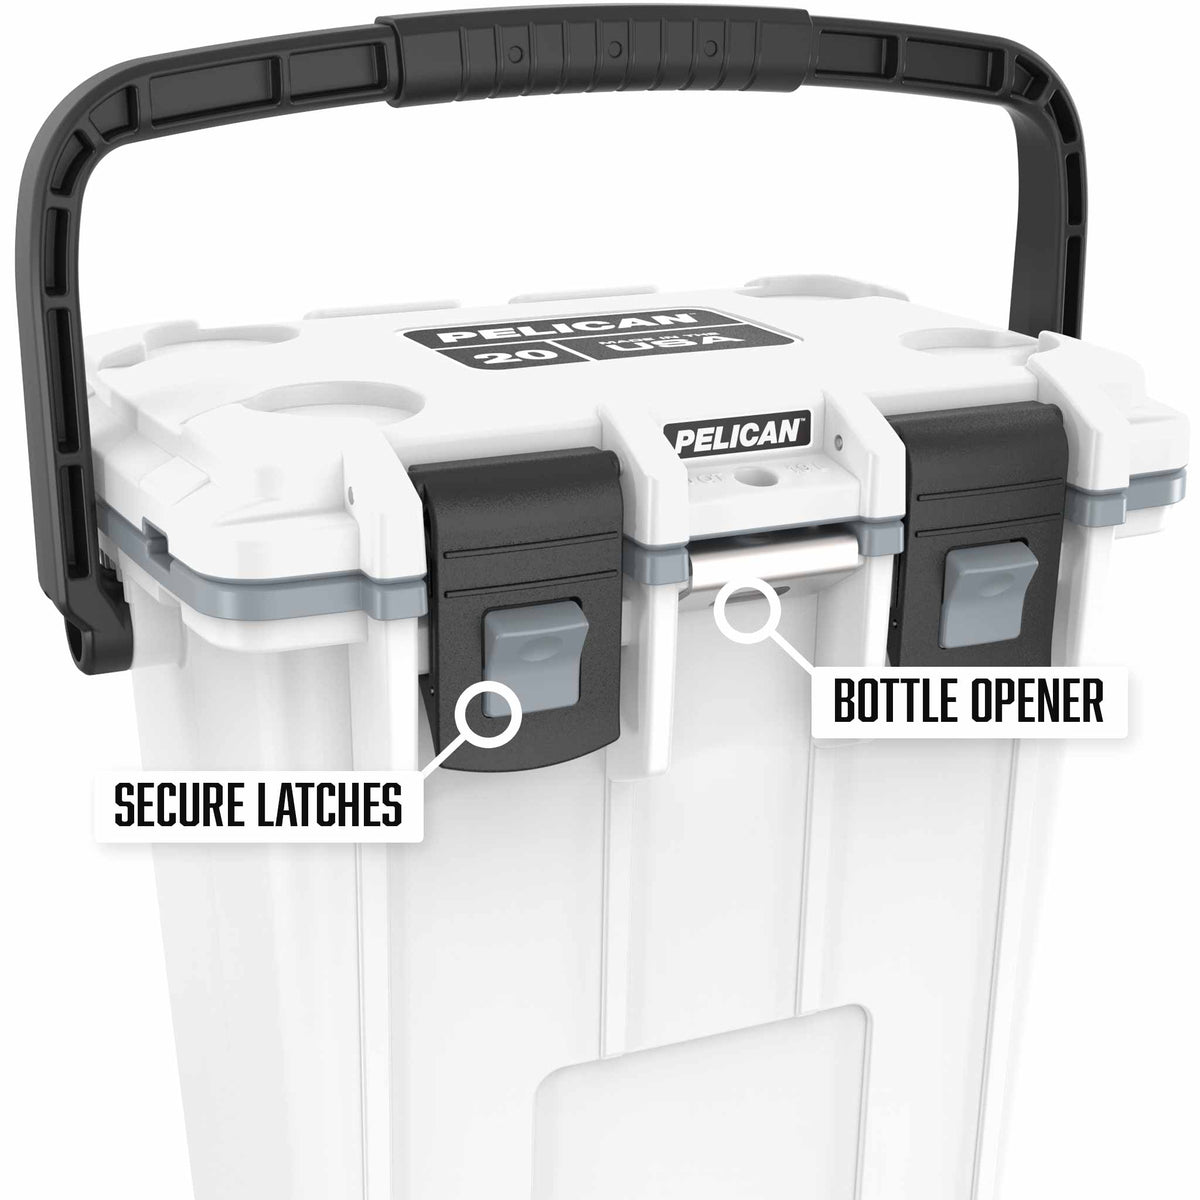 20QT Pelican Elite Cooler with secure latches and a built in bottle opener